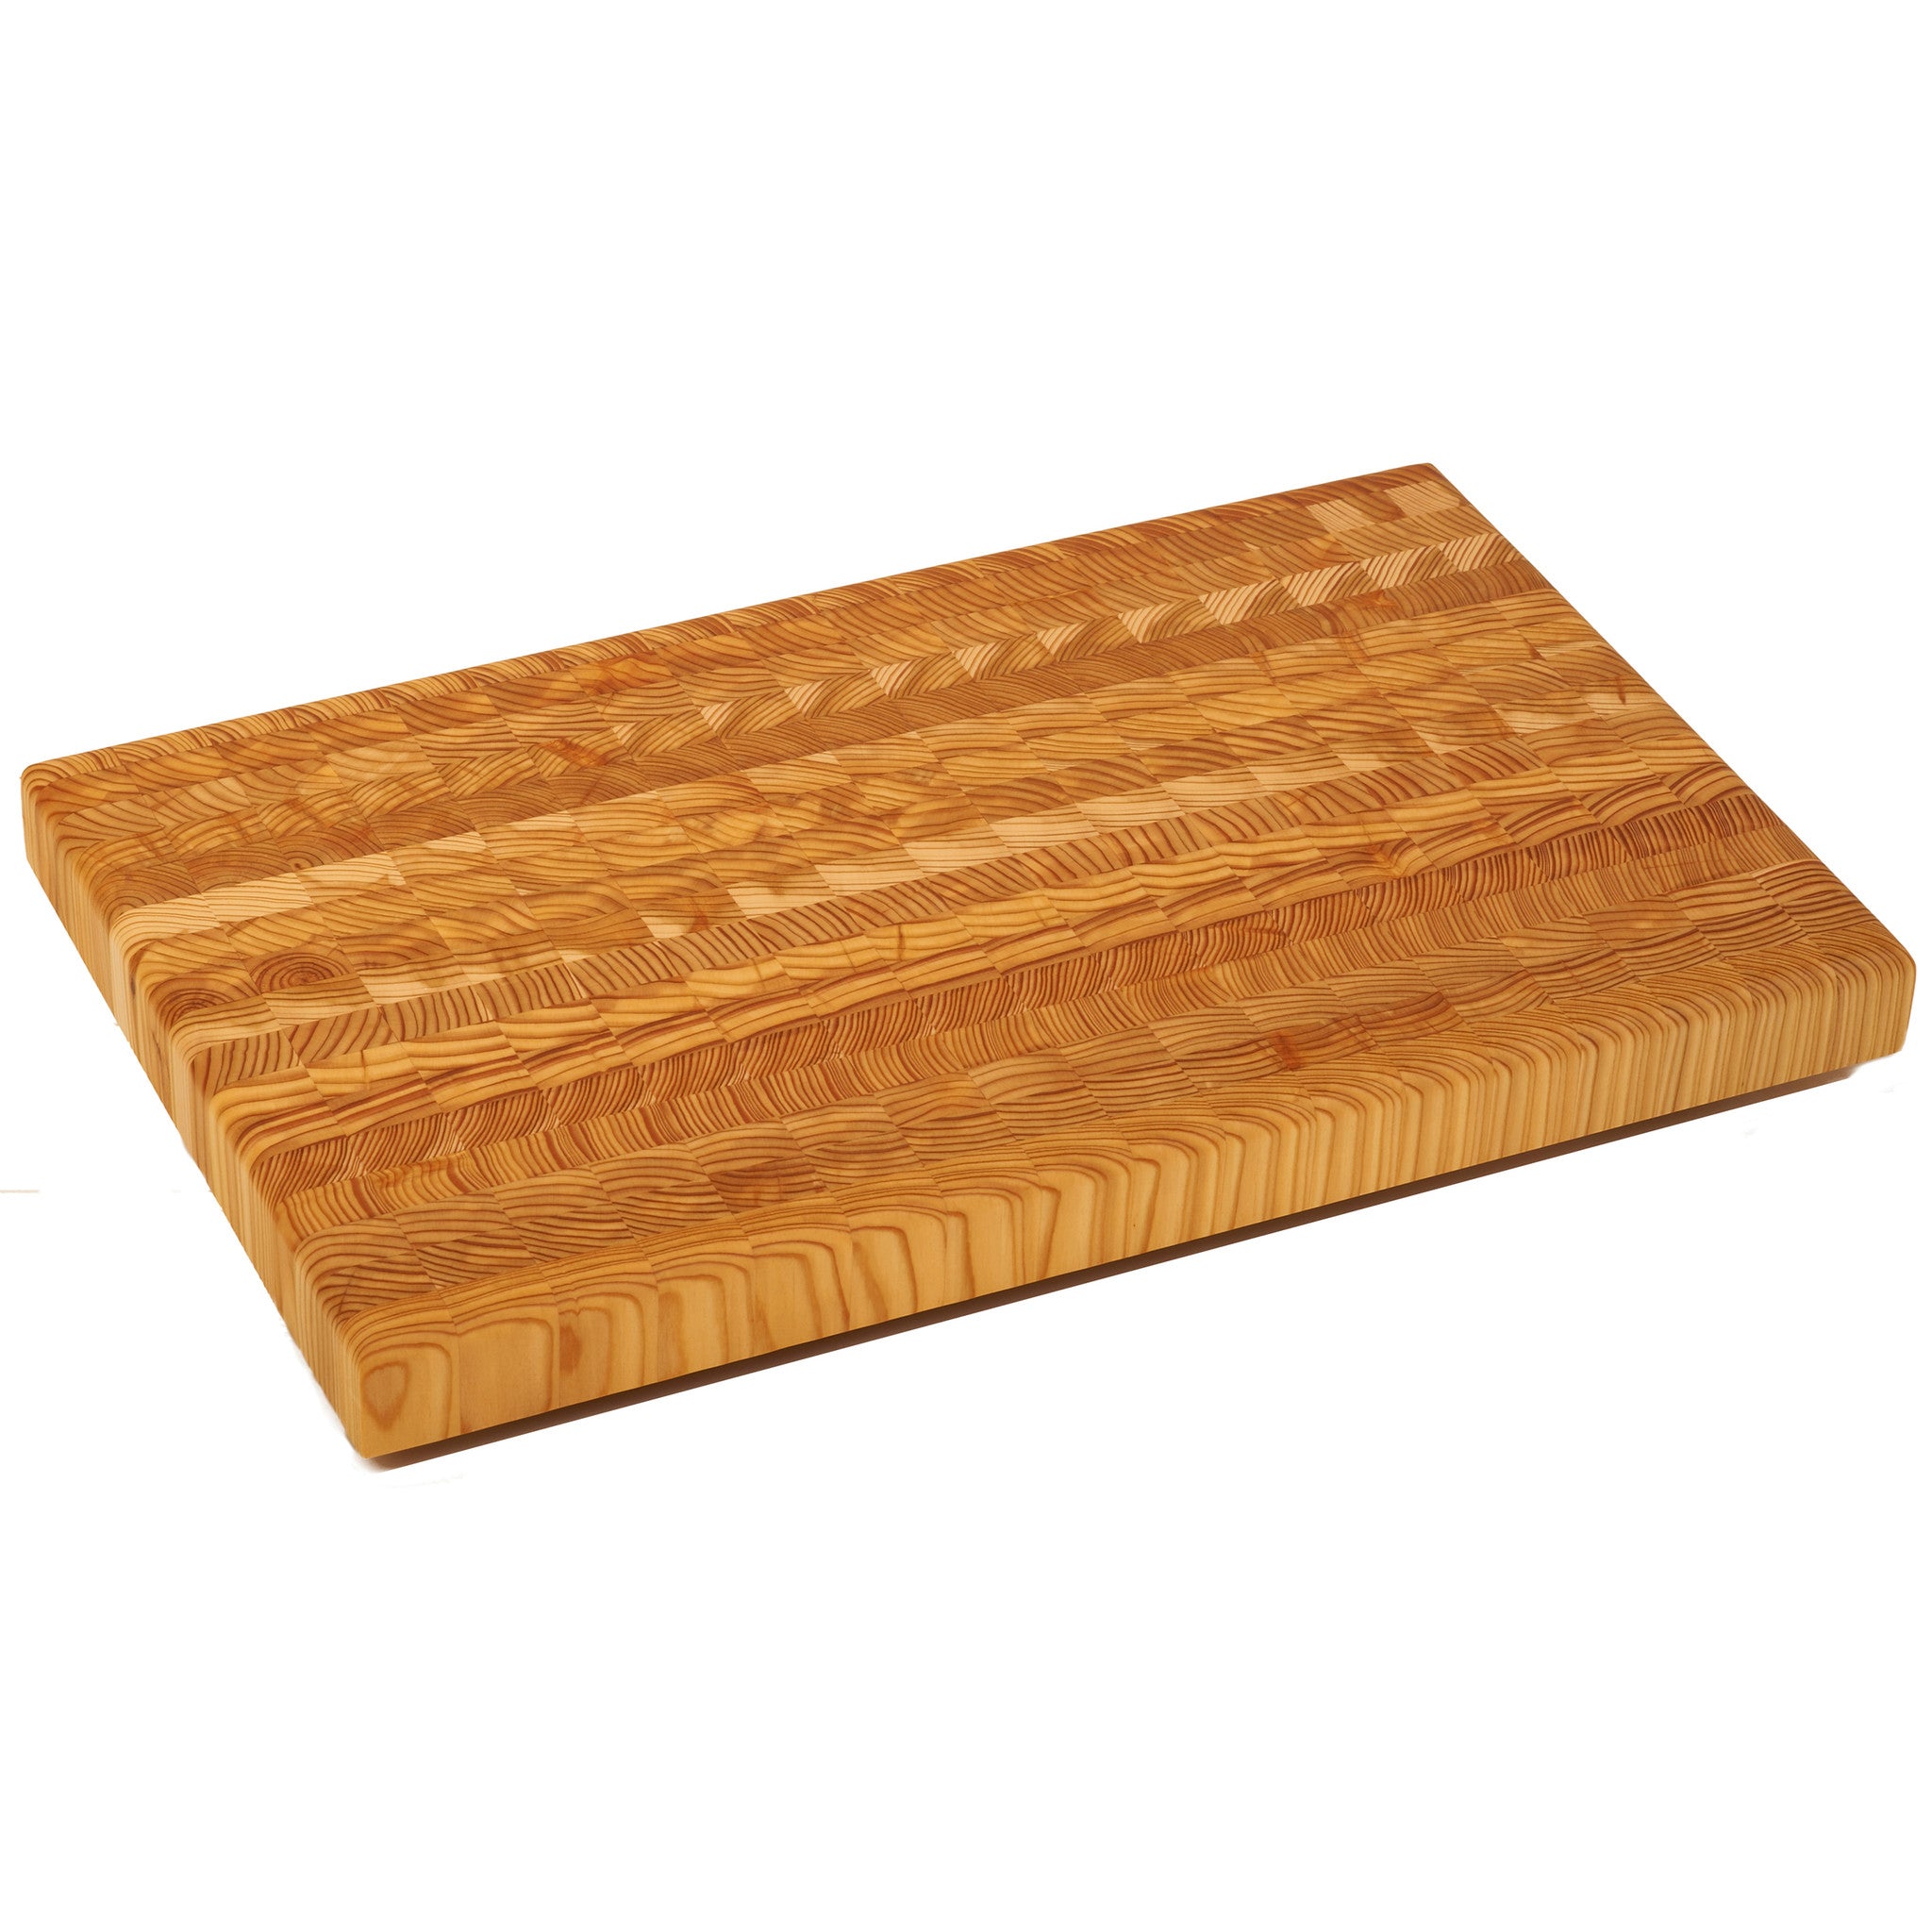 Larch Wood Large LG End Grain Cutting Board – Sweetheart Gallery:  Contemporary Craft Gallery, Fine American Craft, Art, Design, Handmade Home  & Personal Accessories